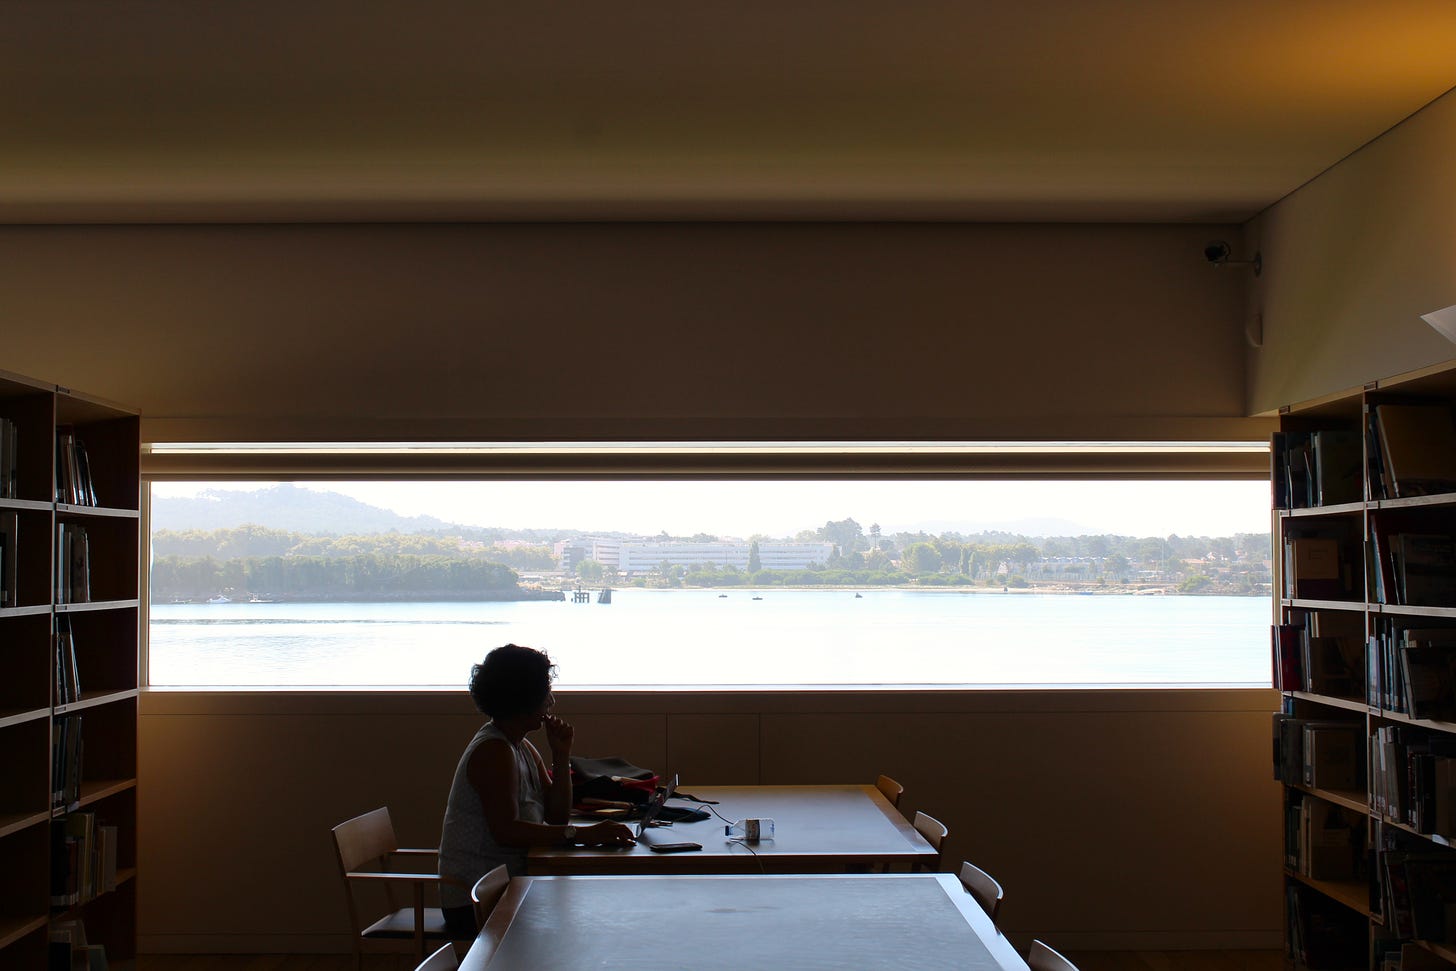 A silhouette of a woman sitting at a study table between two bookshelves; the window behind her shows a body of water.